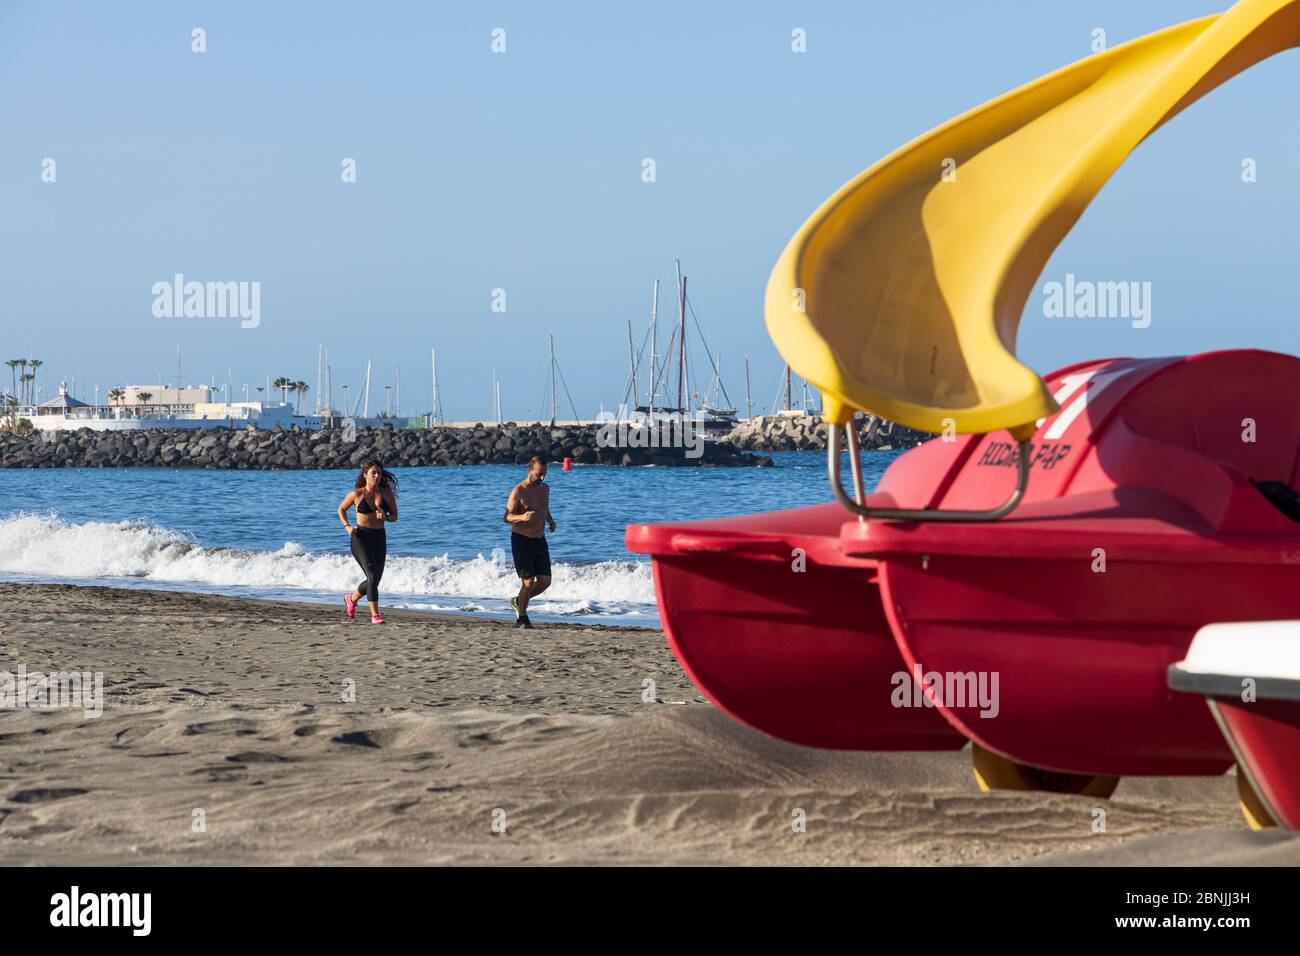 Costa Adeje, Tenerife, Canary Islands, Spain. 15 May 2020. Playa Fañabe beach opens for limited exercise and sports activities. Walking, running are allowed but no sunbathing, water sports or swimming under the de-escalation of the Covid 19, Coronavirus lockdown. Runners on the shore. Stock Photo